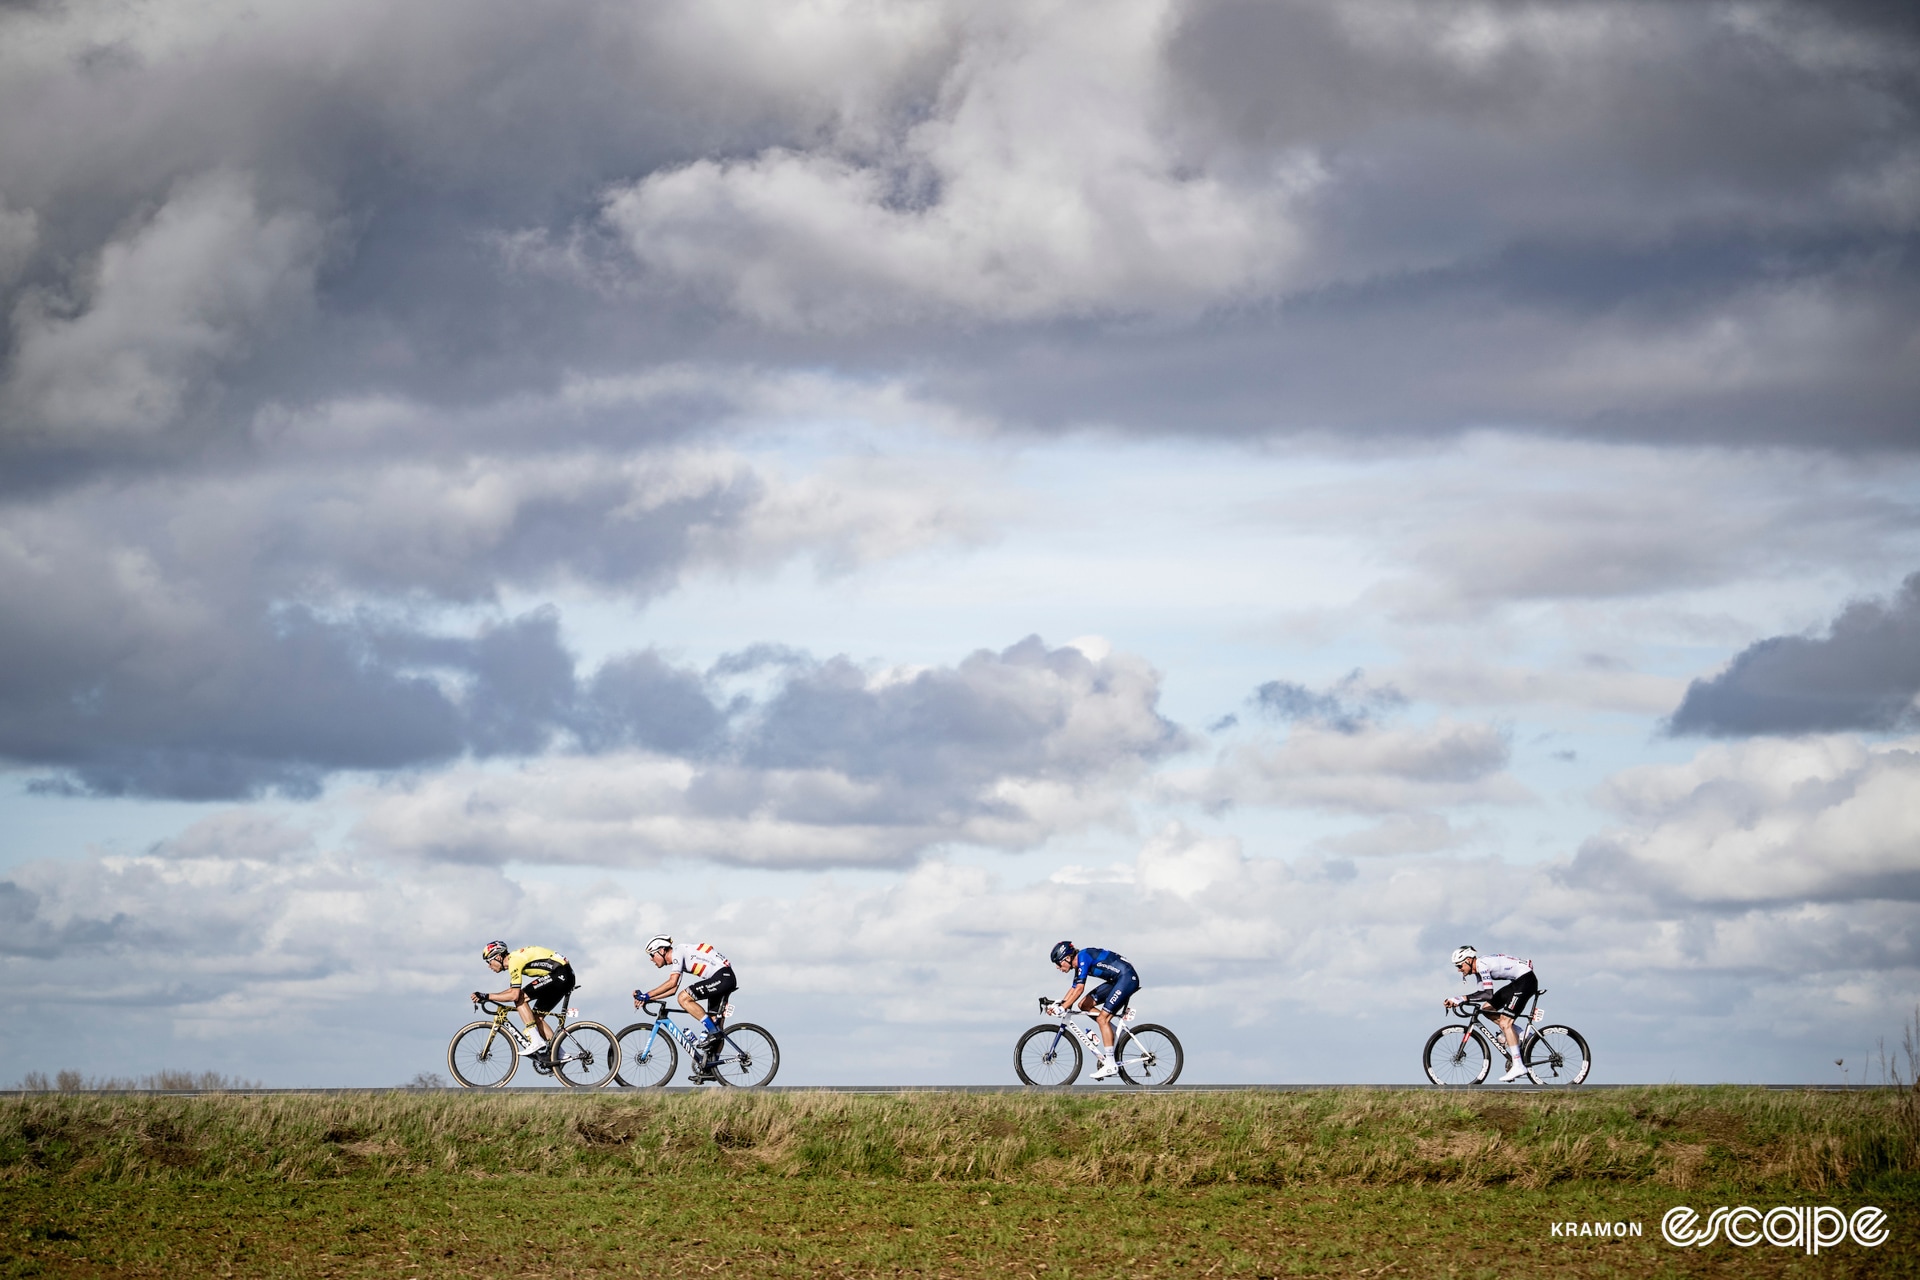 The four lead riders in front of a moody sky